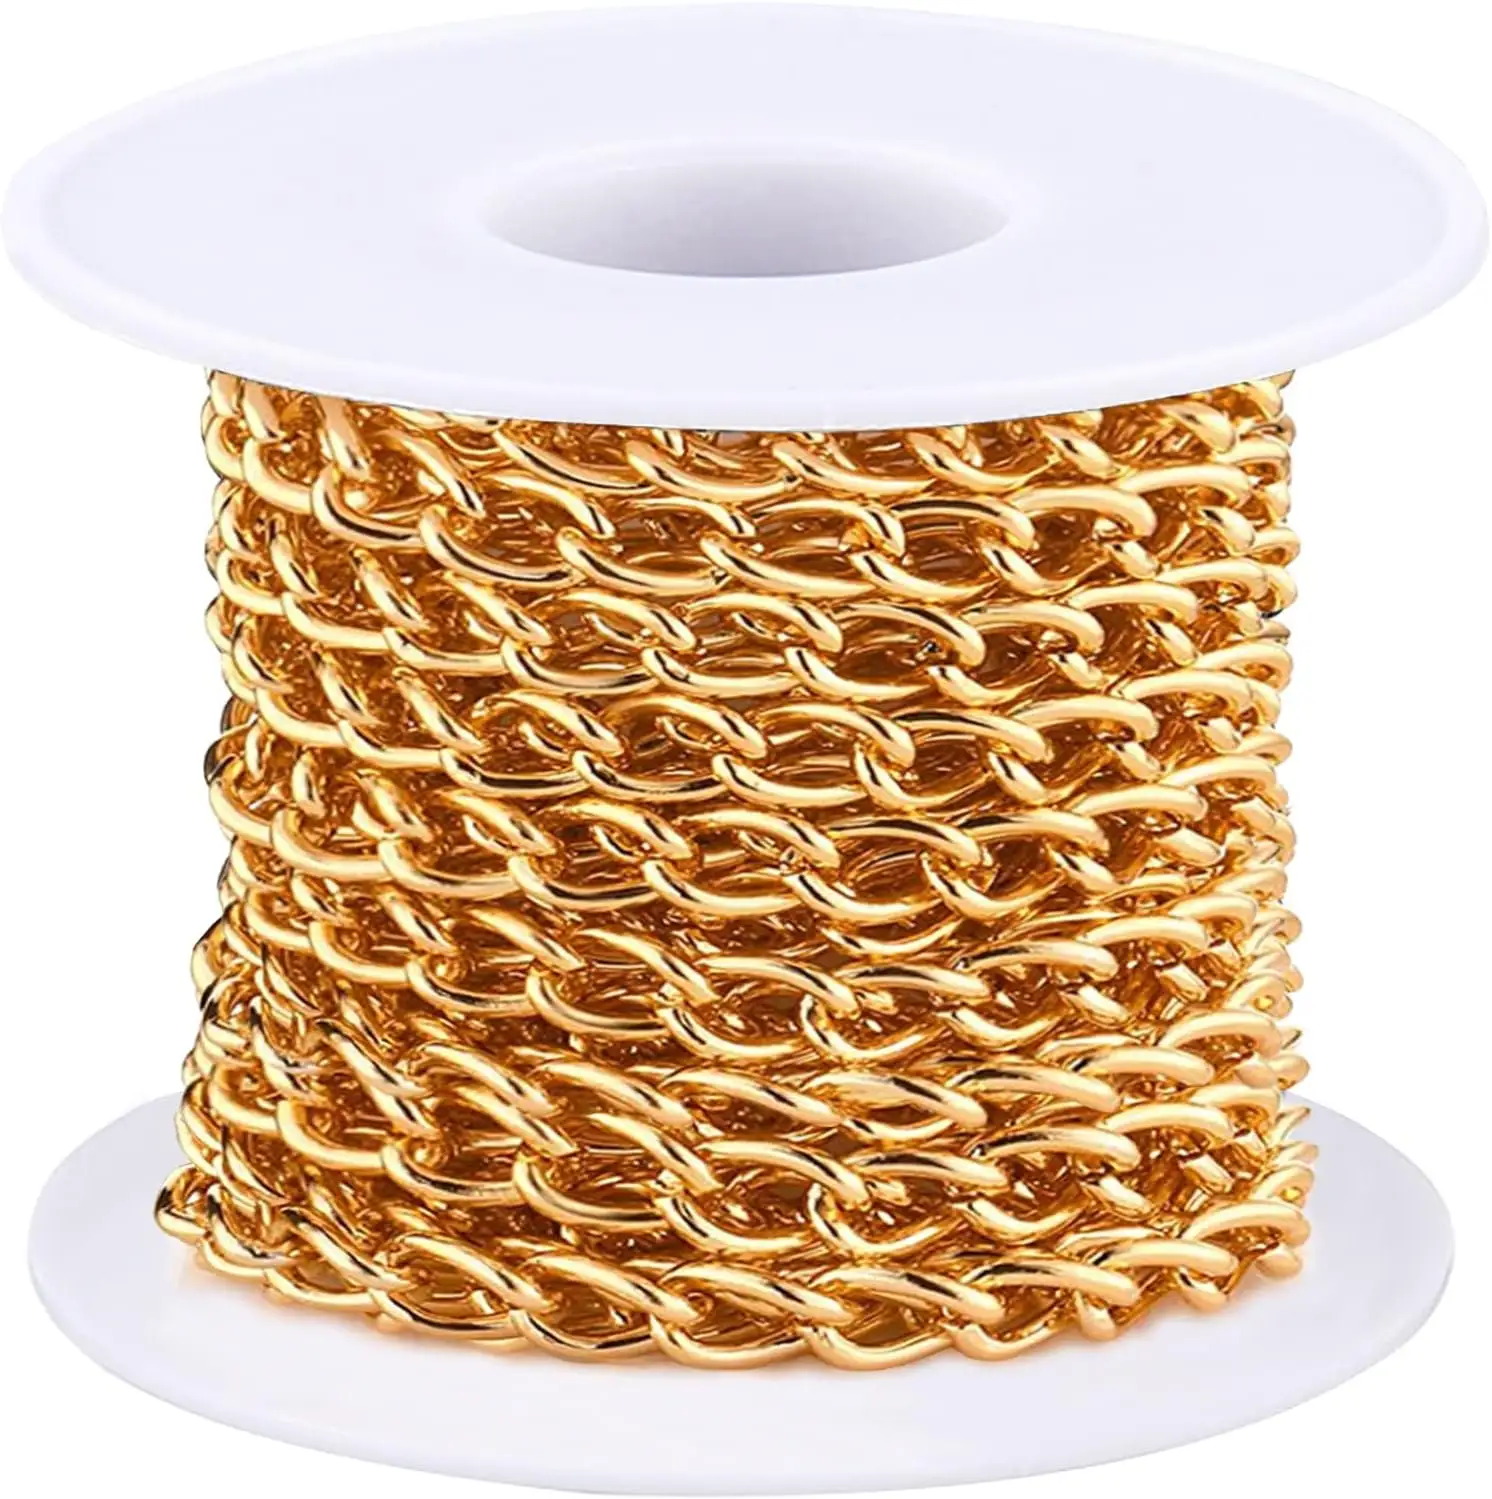 Aluminium Curb Chain Roll, Thick Twisted Chain Links, Gold Plated Metal Craft Chain Curb Link Chain Spool for Jewelry Making